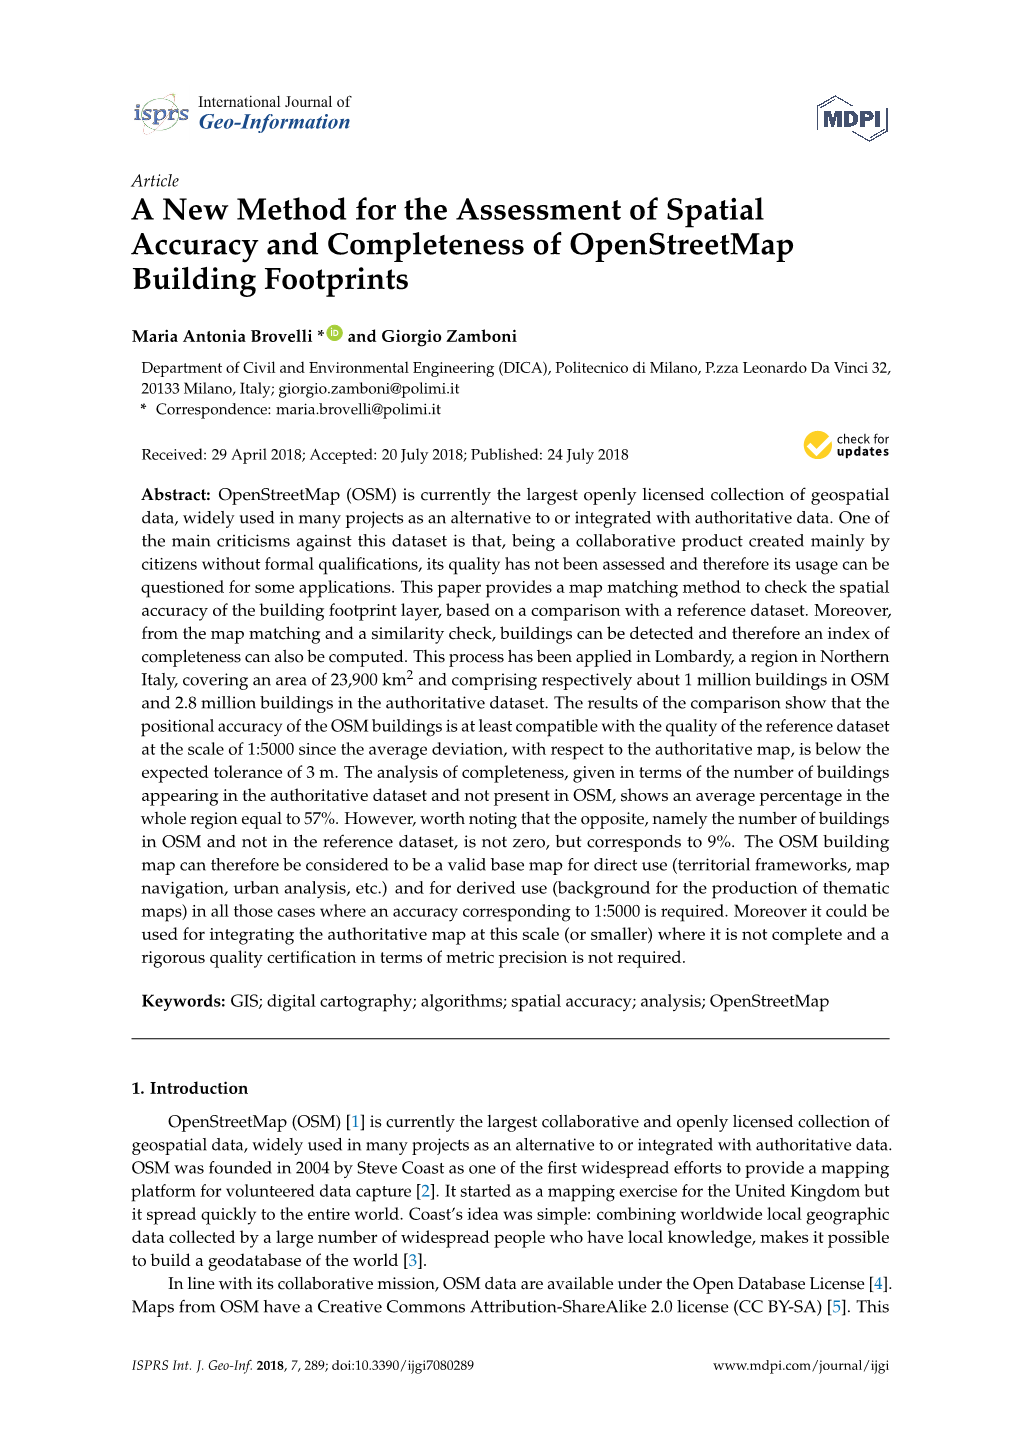 A New Method for the Assessment of Spatial Accuracy and Completeness of Openstreetmap Building Footprints